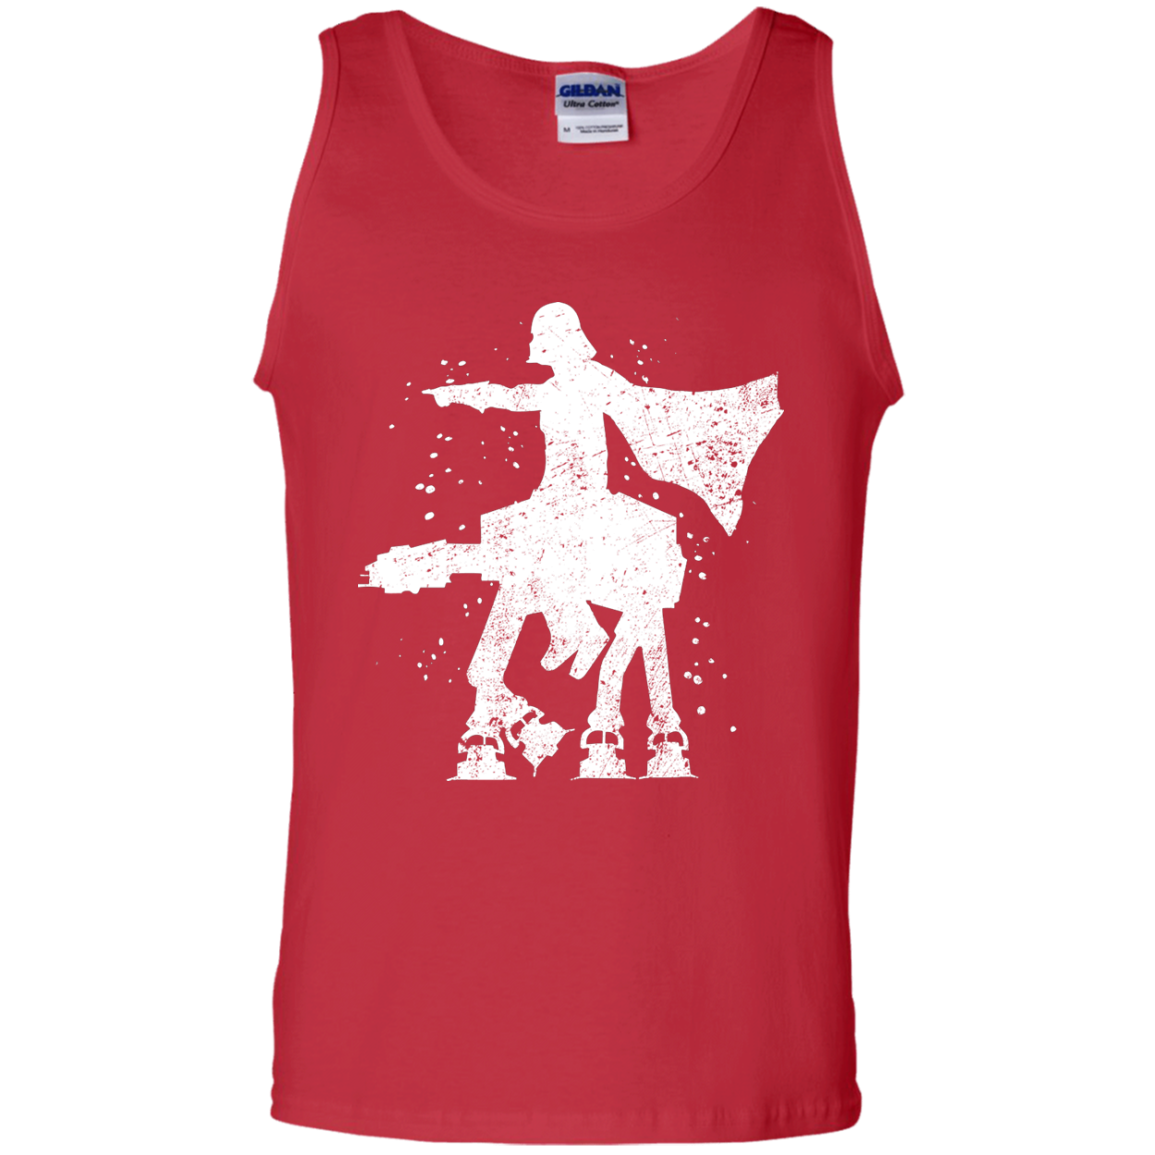 To Hoth Men's Tank Top